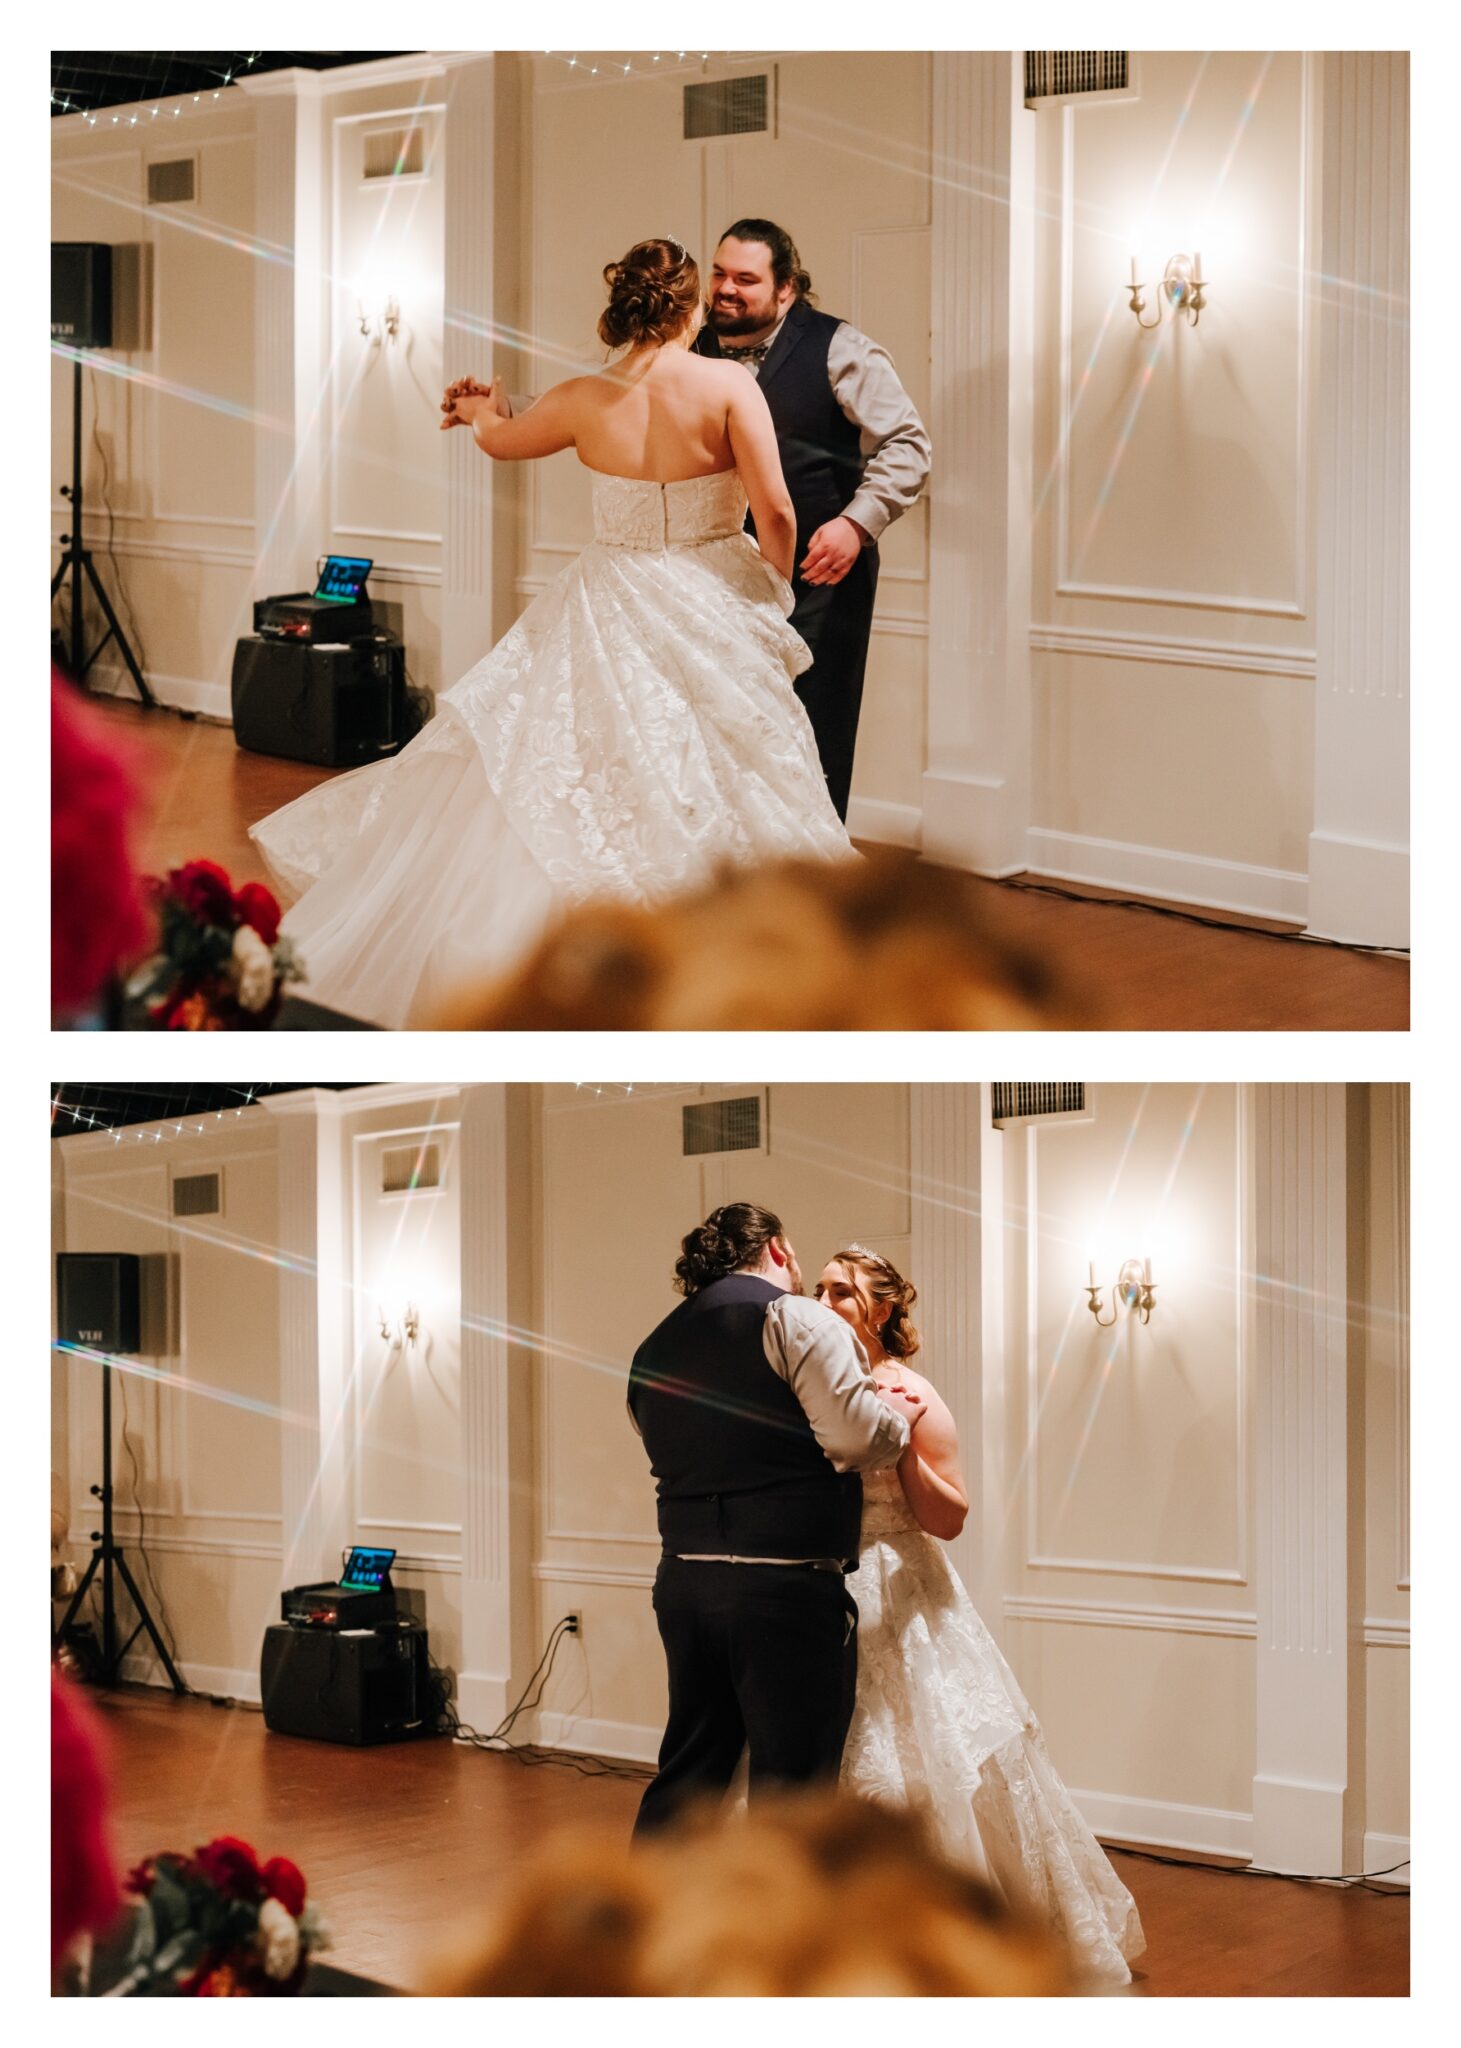 the couple sharing their first dance